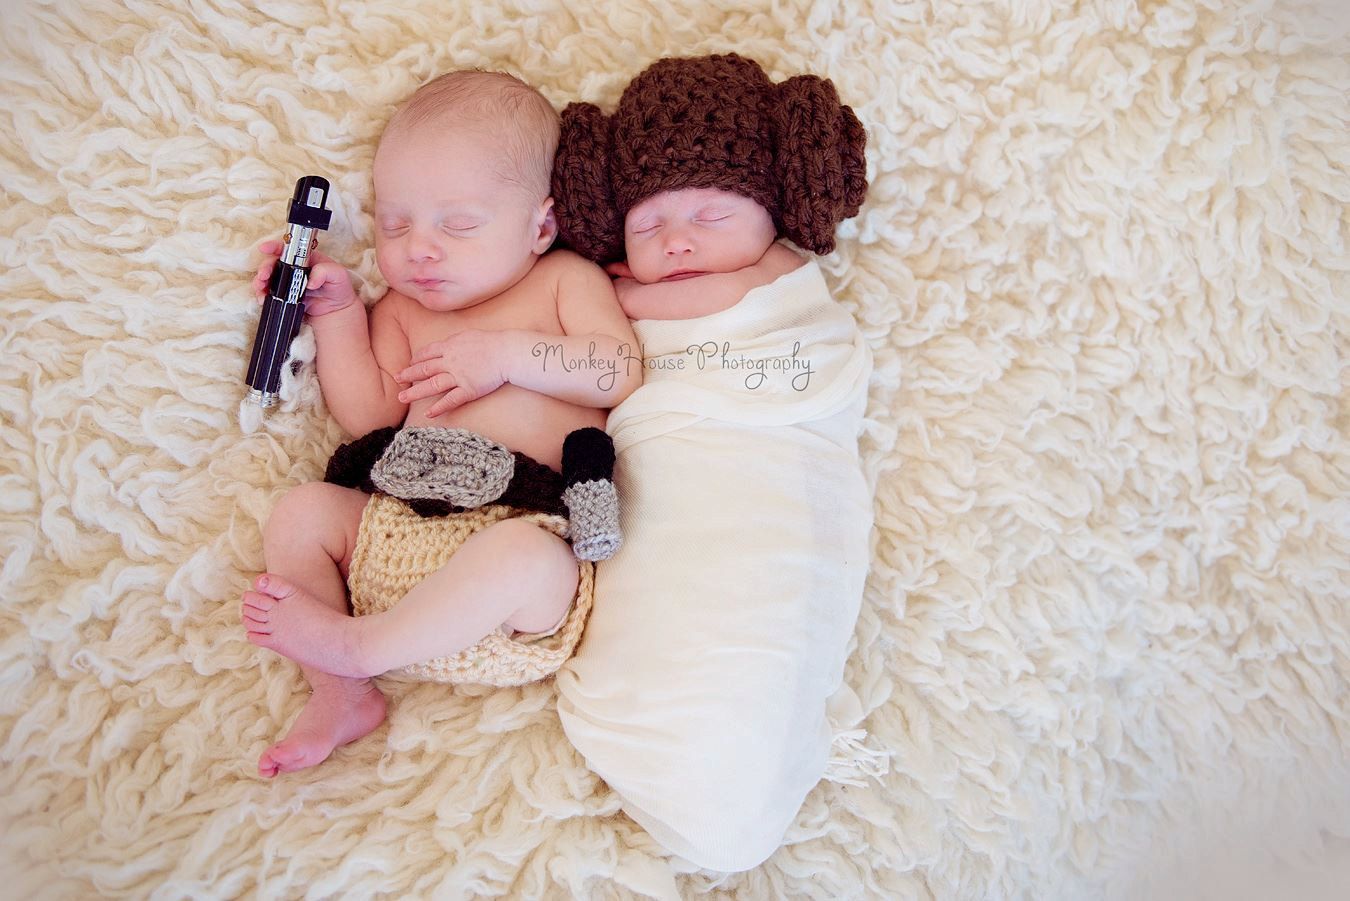 Birth announcements for twins: This Star Wars Twins Announcement is irresistible! Thanks, Me and Morning Glory. 